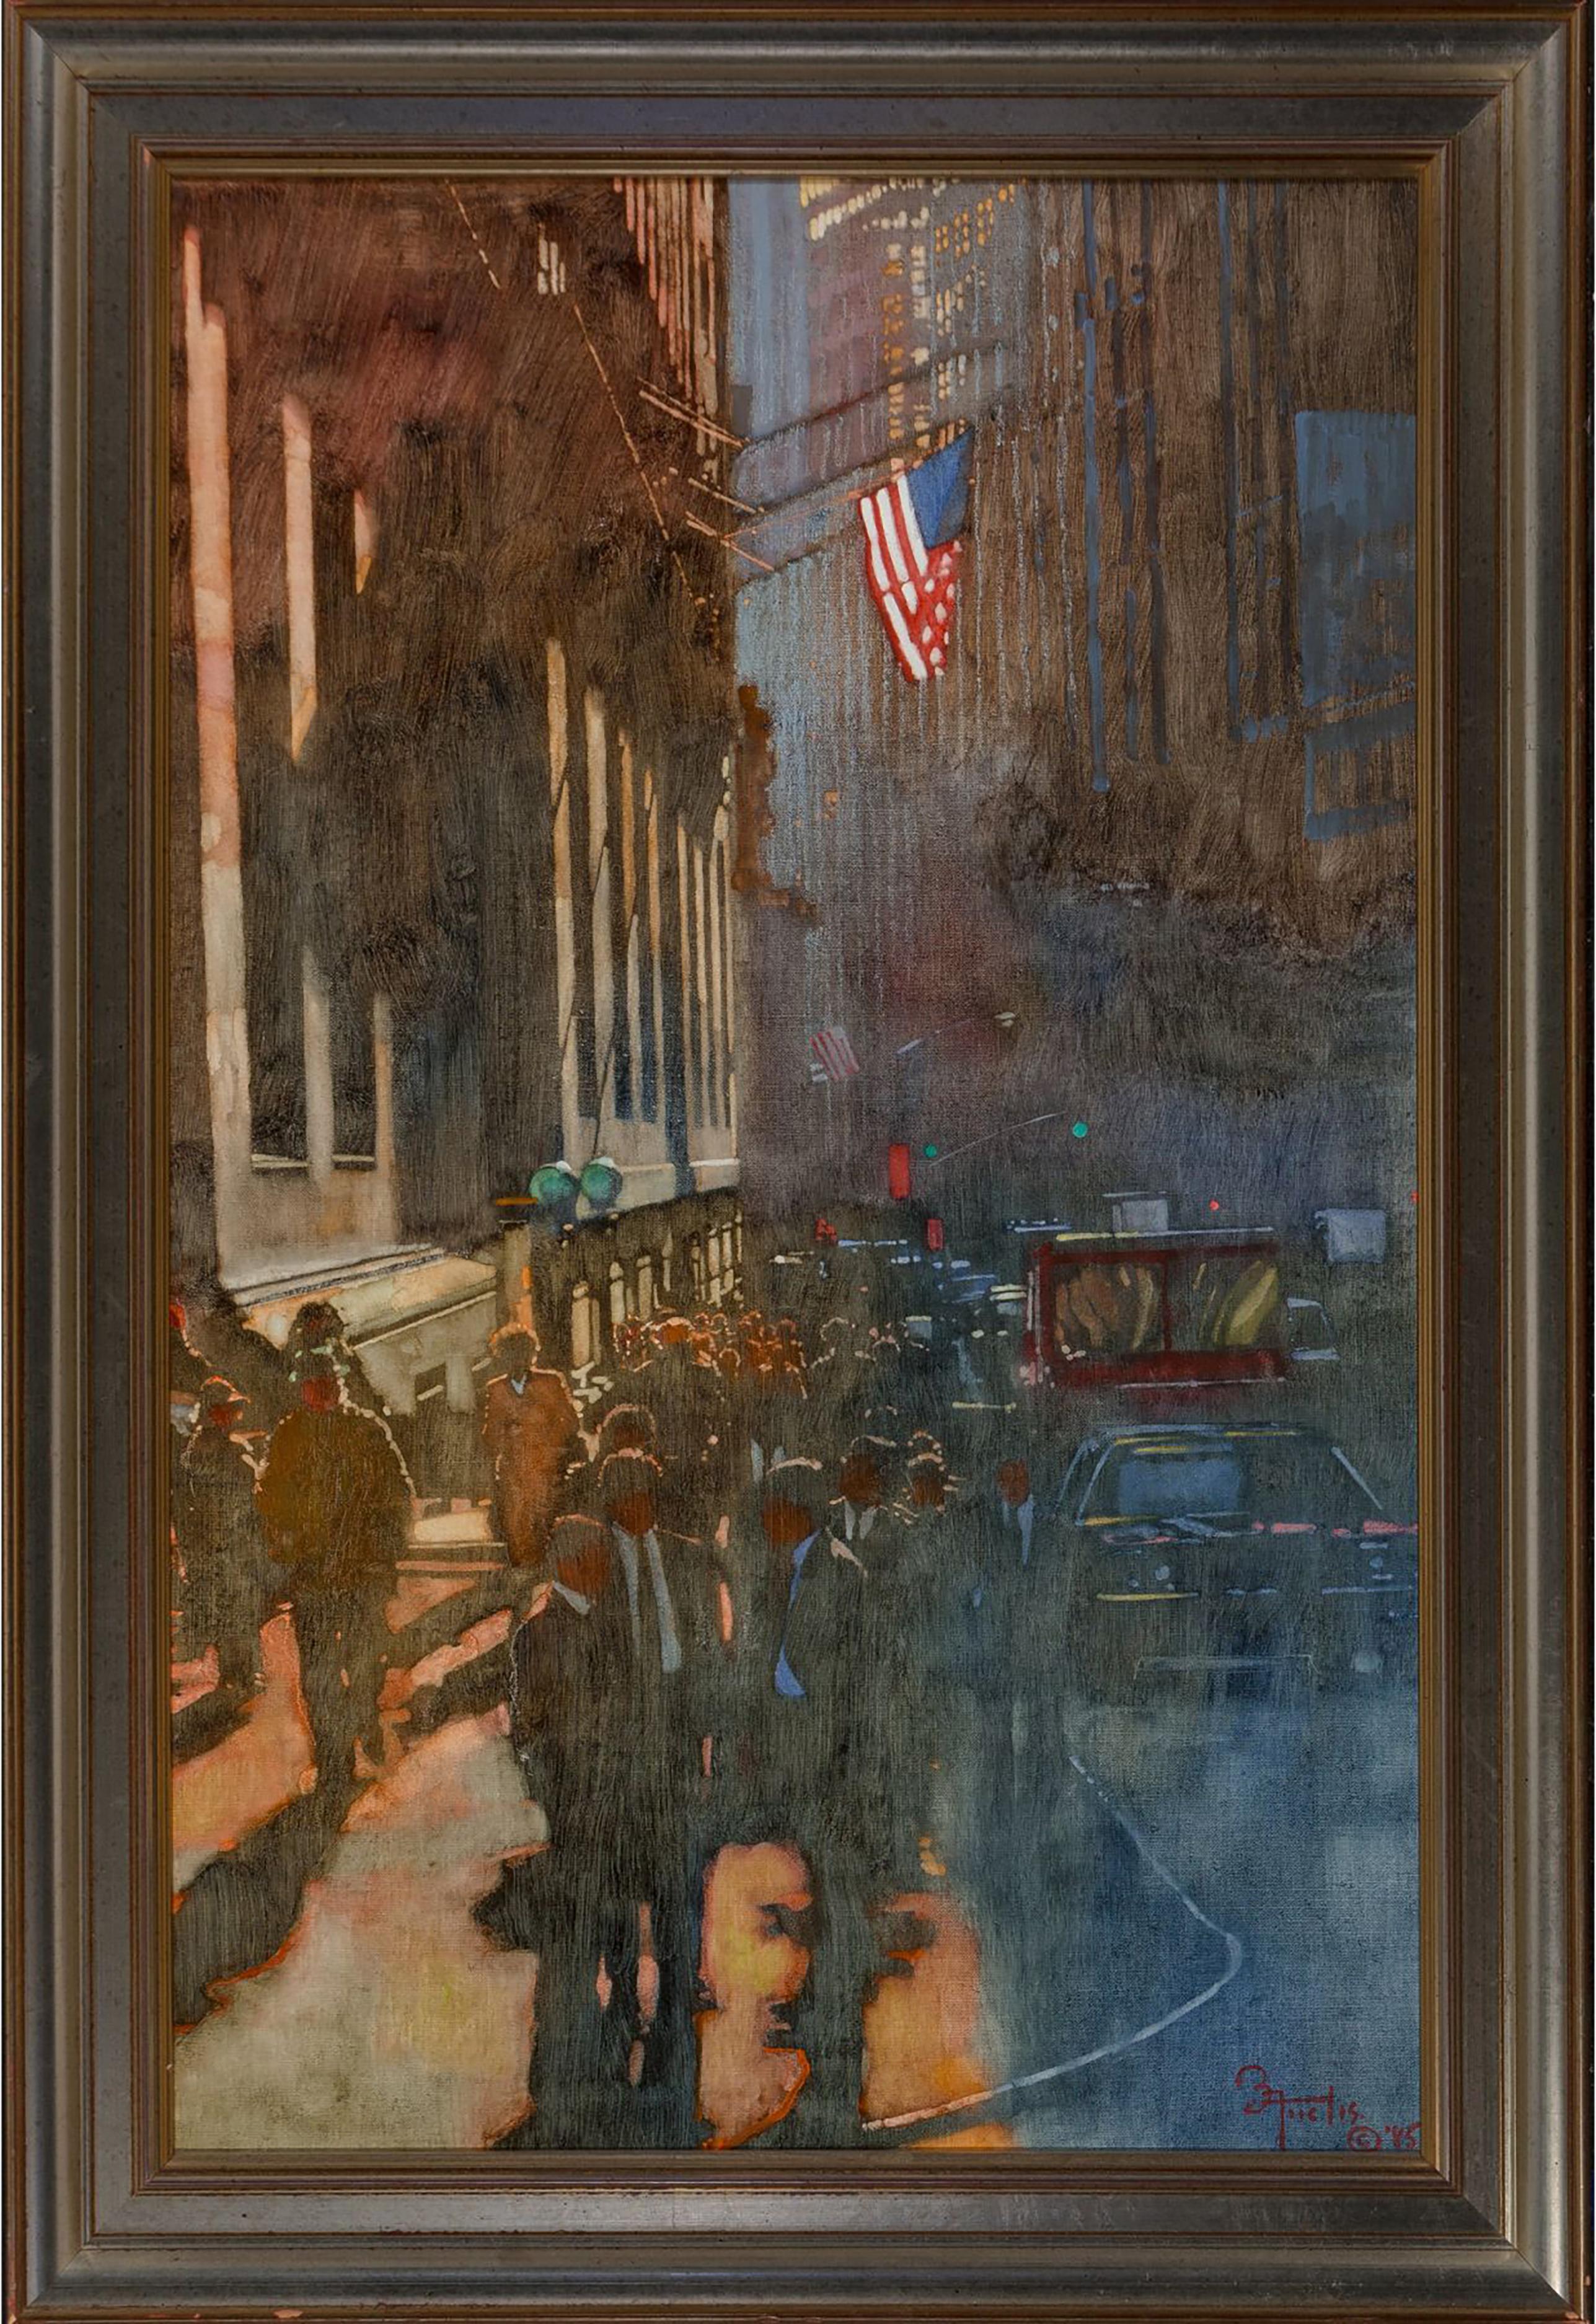 Wall Street in Light and Shadow - Painting by Bernie Fuchs